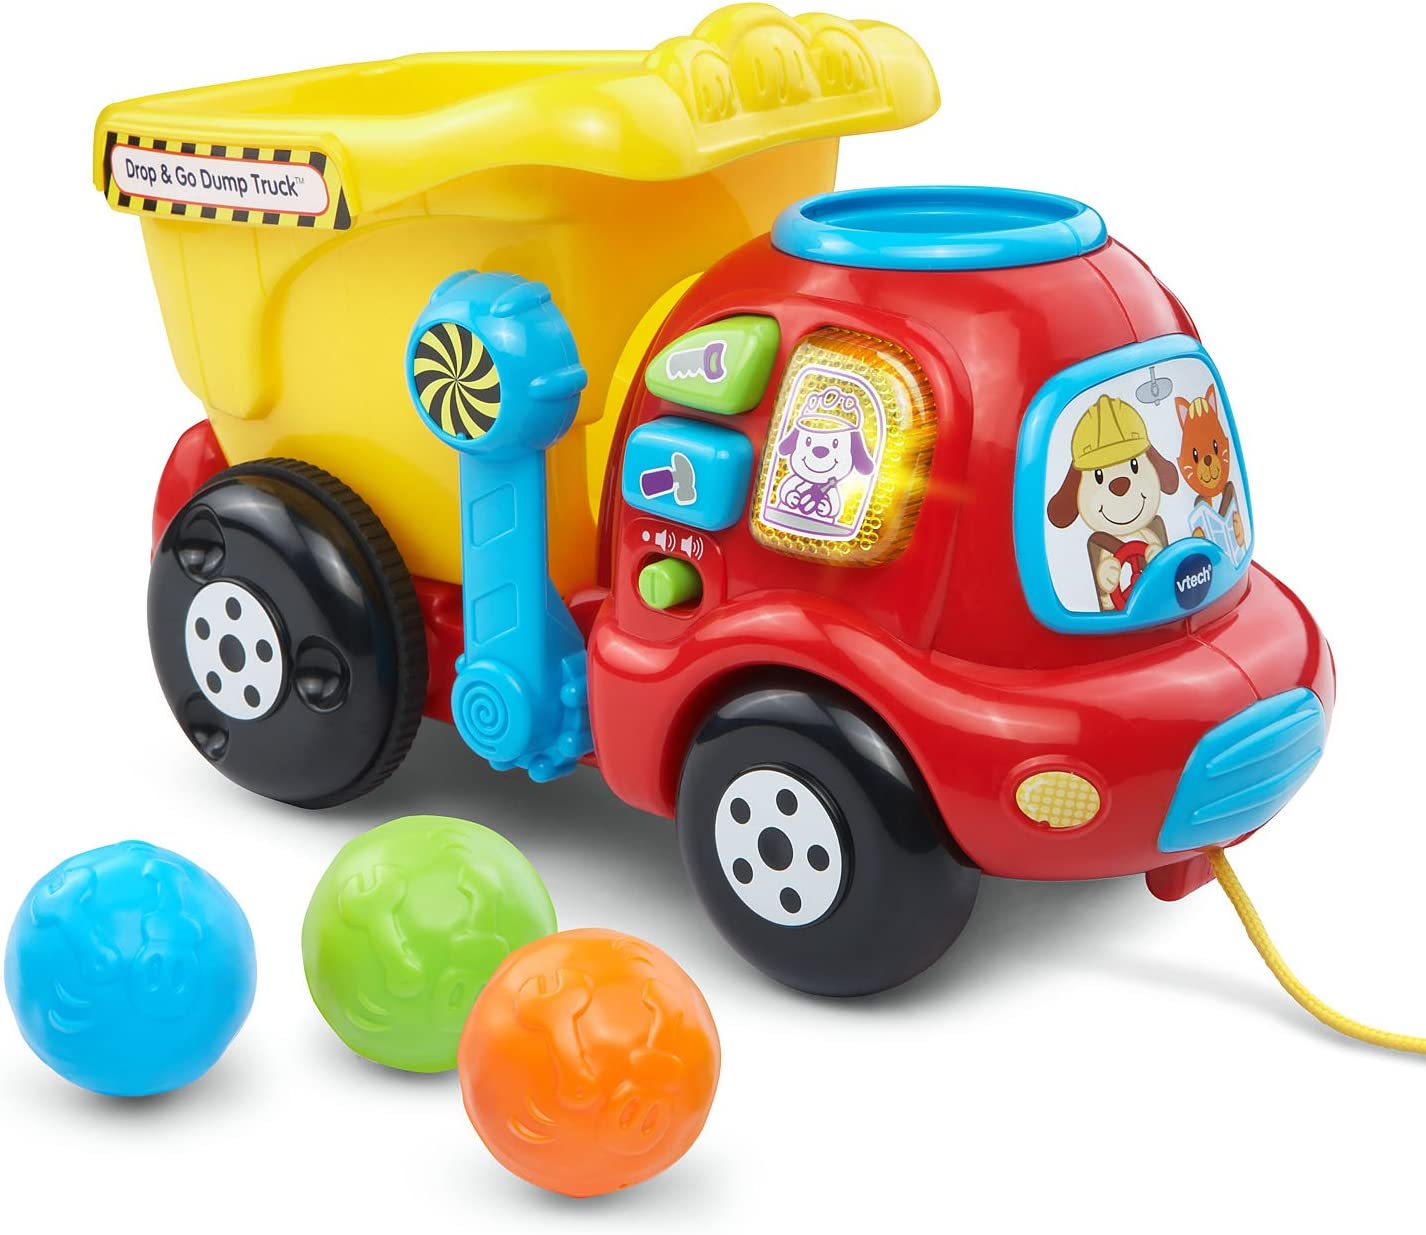 VTech Drop & Go Battery-Operated Toy Dump Truck $6 + Free S&H w/ Prime or $25+